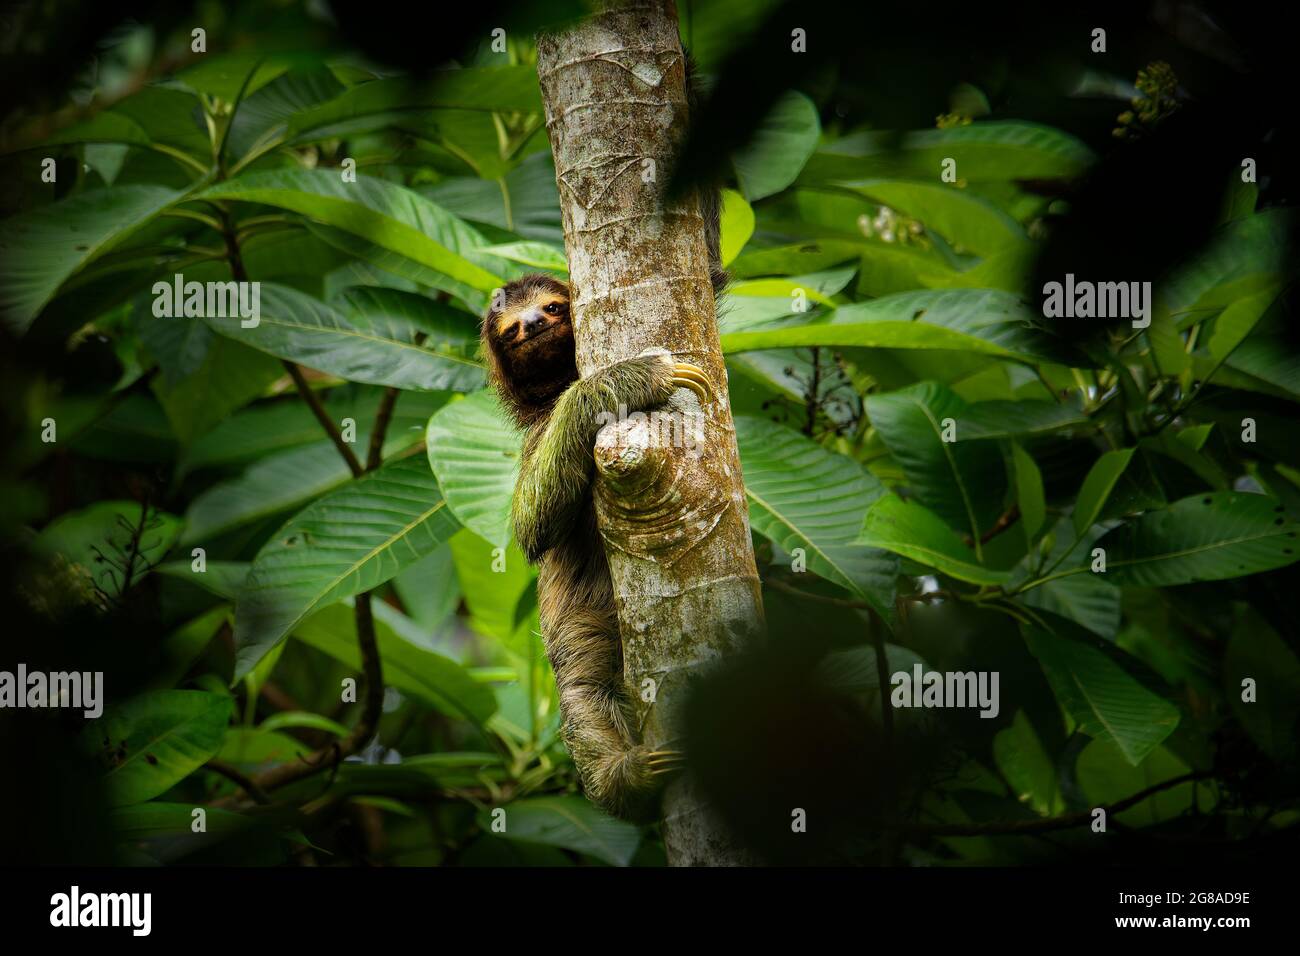 Brown-throated sloth - Bradypus variegatus species of three-toed sloth found in the Neotropical realm of Central and South America, mammal found in th Stock Photo